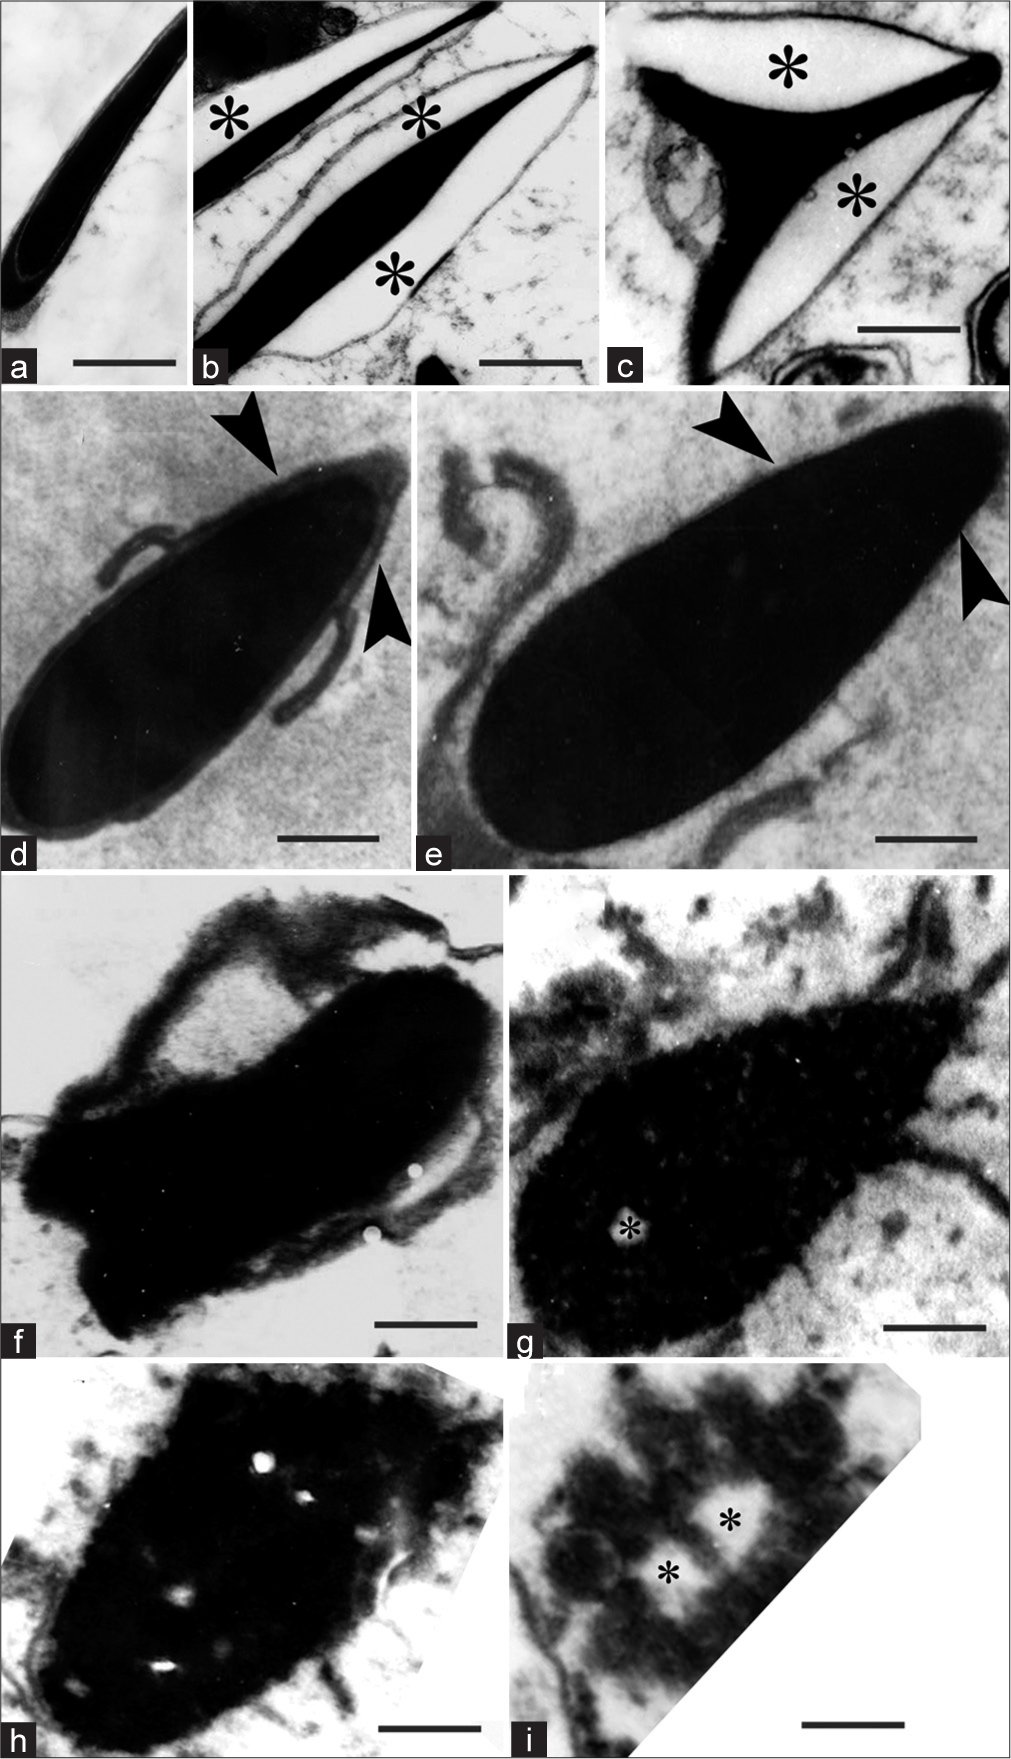 Control of sperm quality in the epididymis by disintegration and removal – A transmission electron microscopy study of abnormal sperm of aflatoxin-treated rat